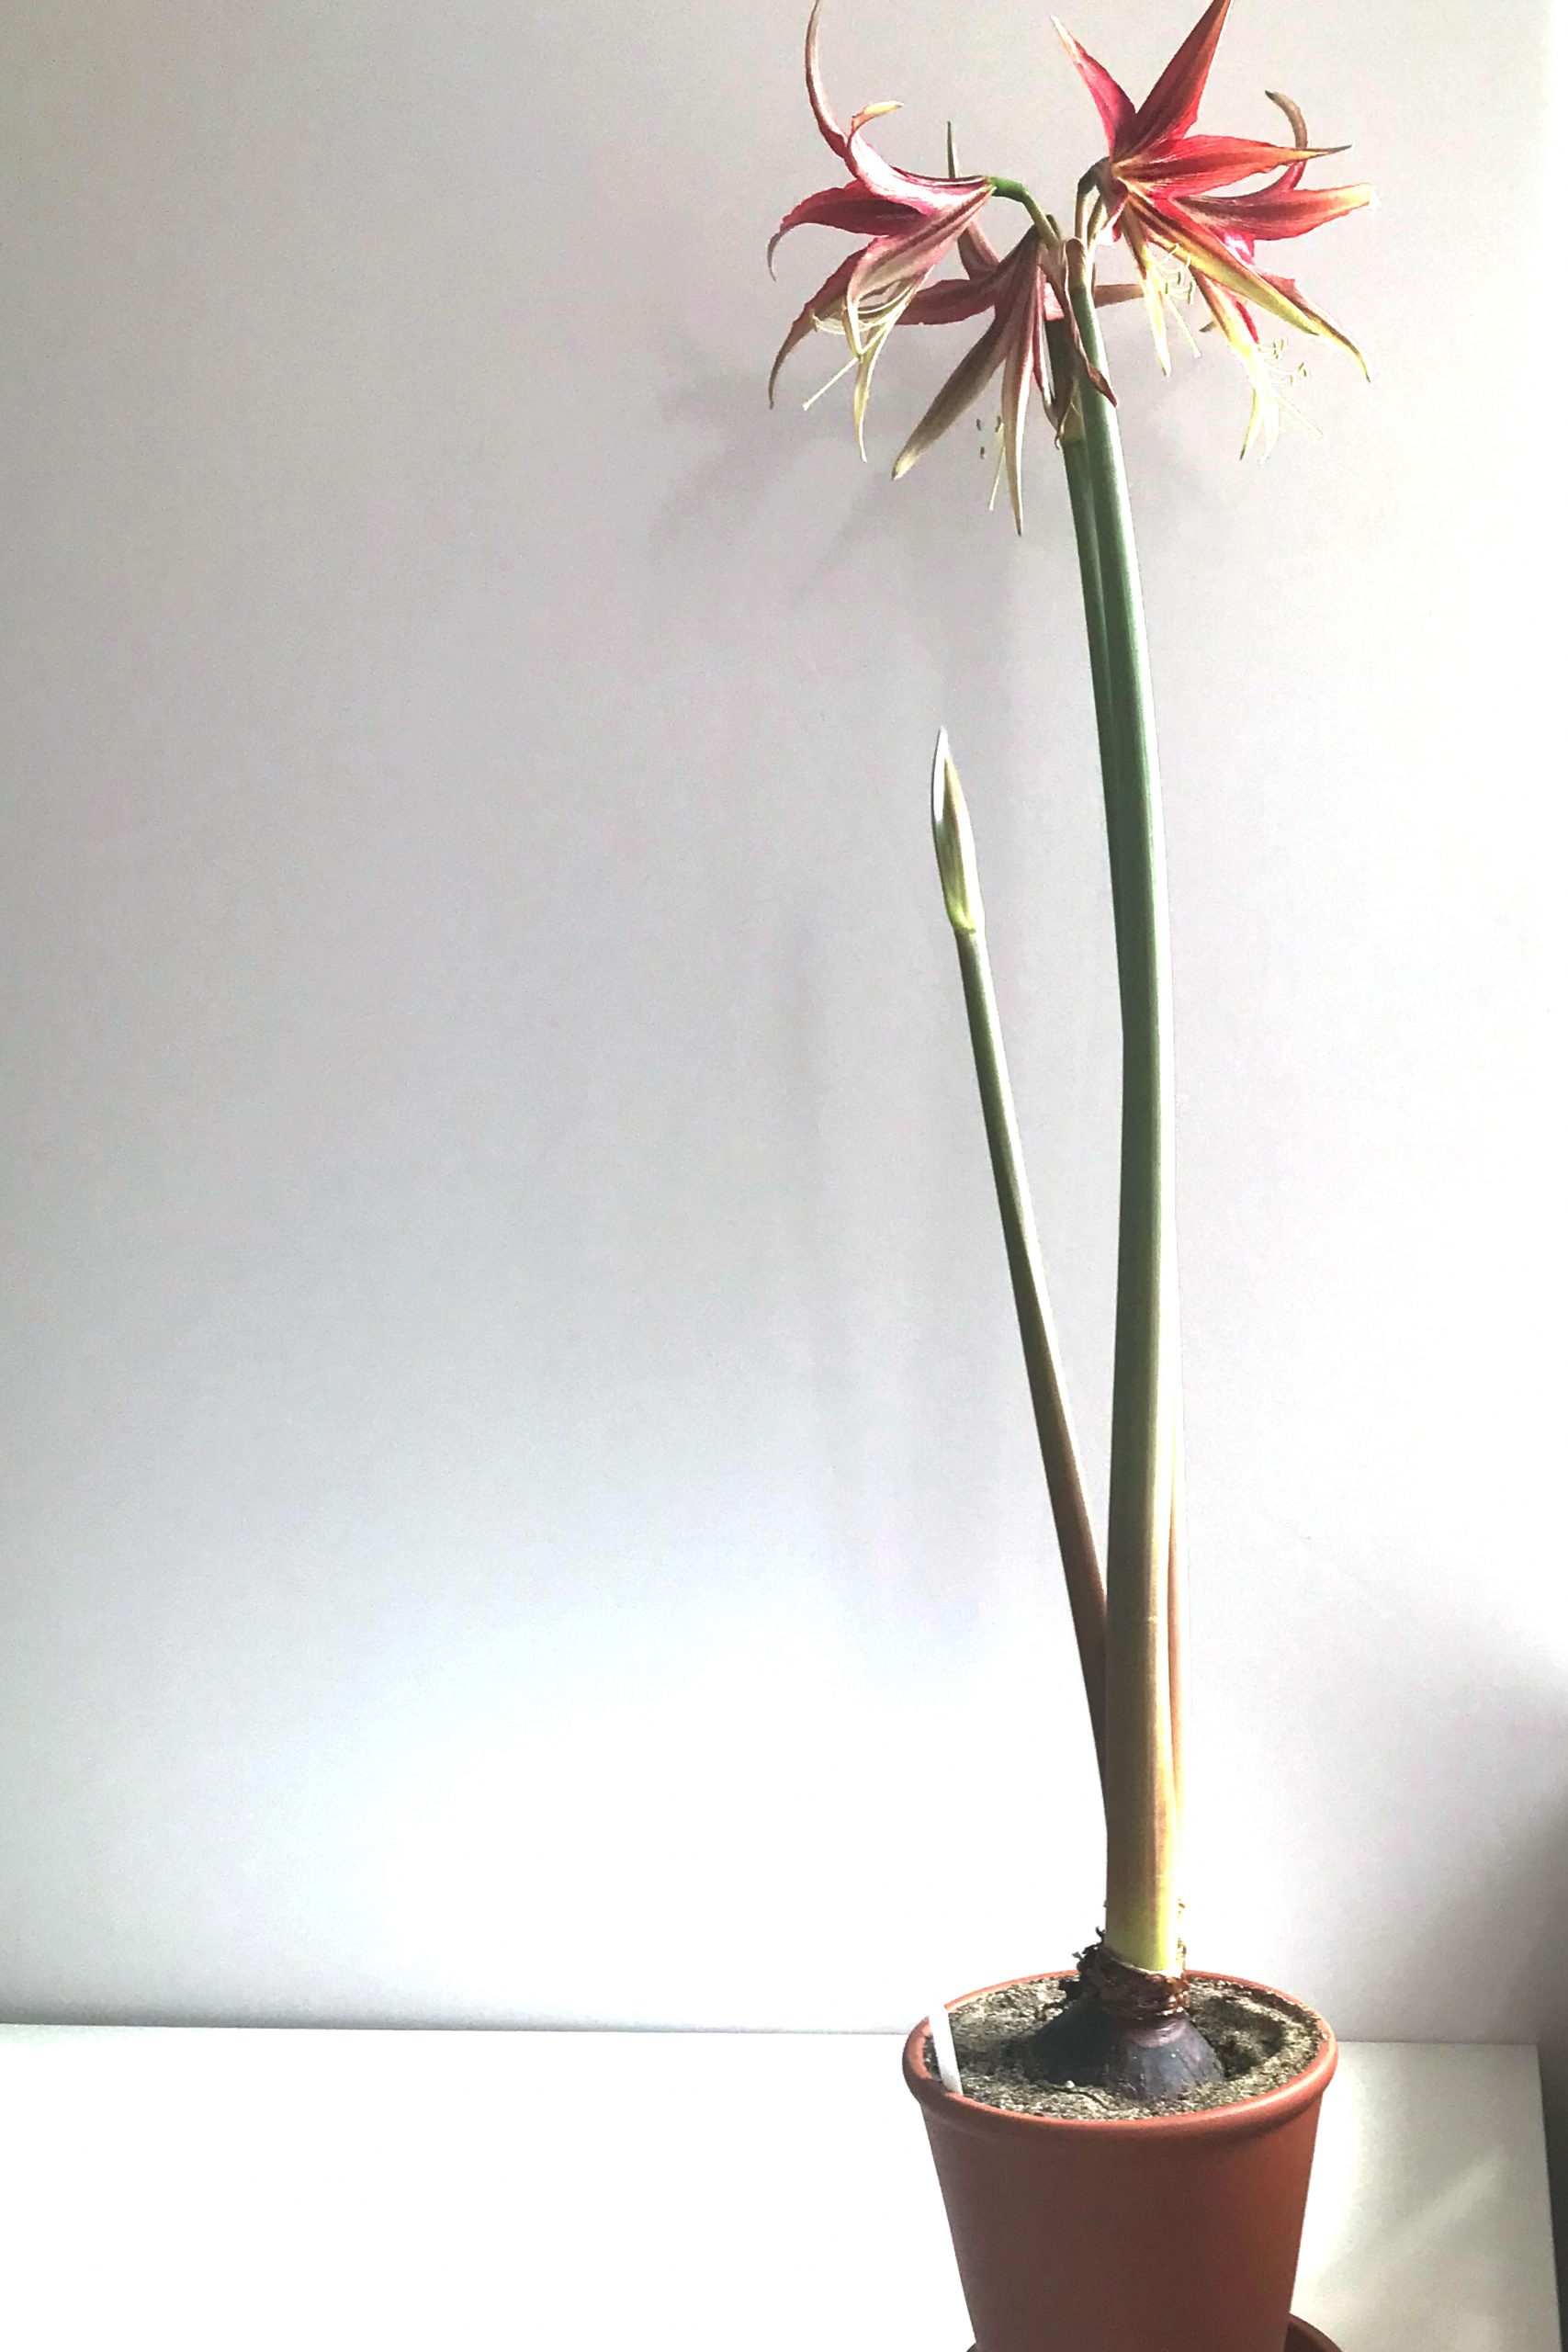 Full length view of amaryllis 'La Paz' in bloom in a terracotta pot on a white desk in Wraptillion's studio, with four spiky flowers in shades of red, orange, and yellow, with another two buds showing.